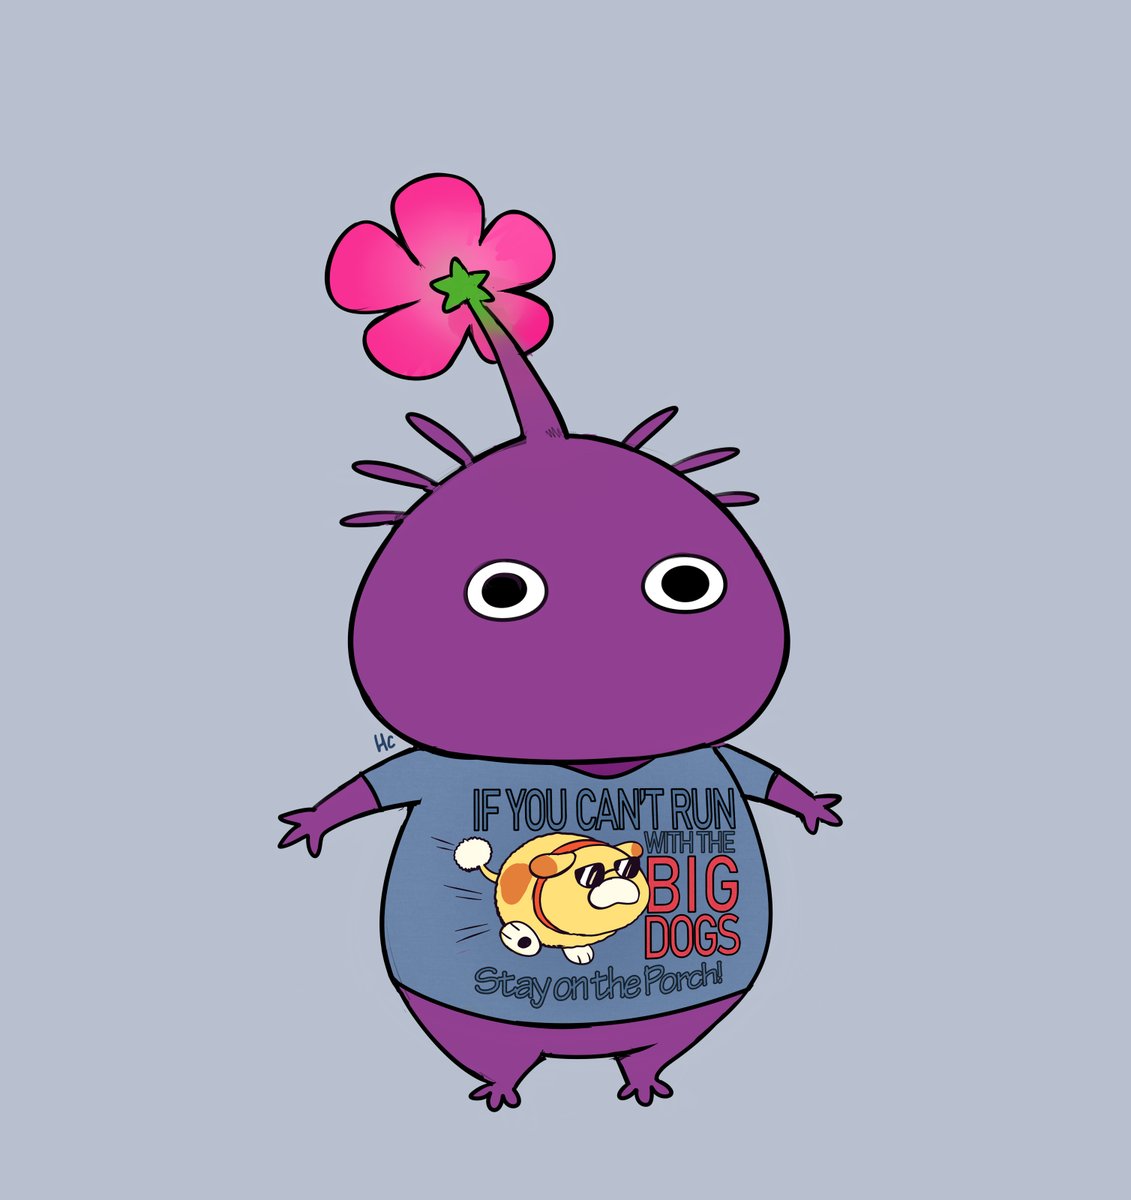 「Purple Pikmin has returned from the mall」|Happycrumble ⭐のイラスト